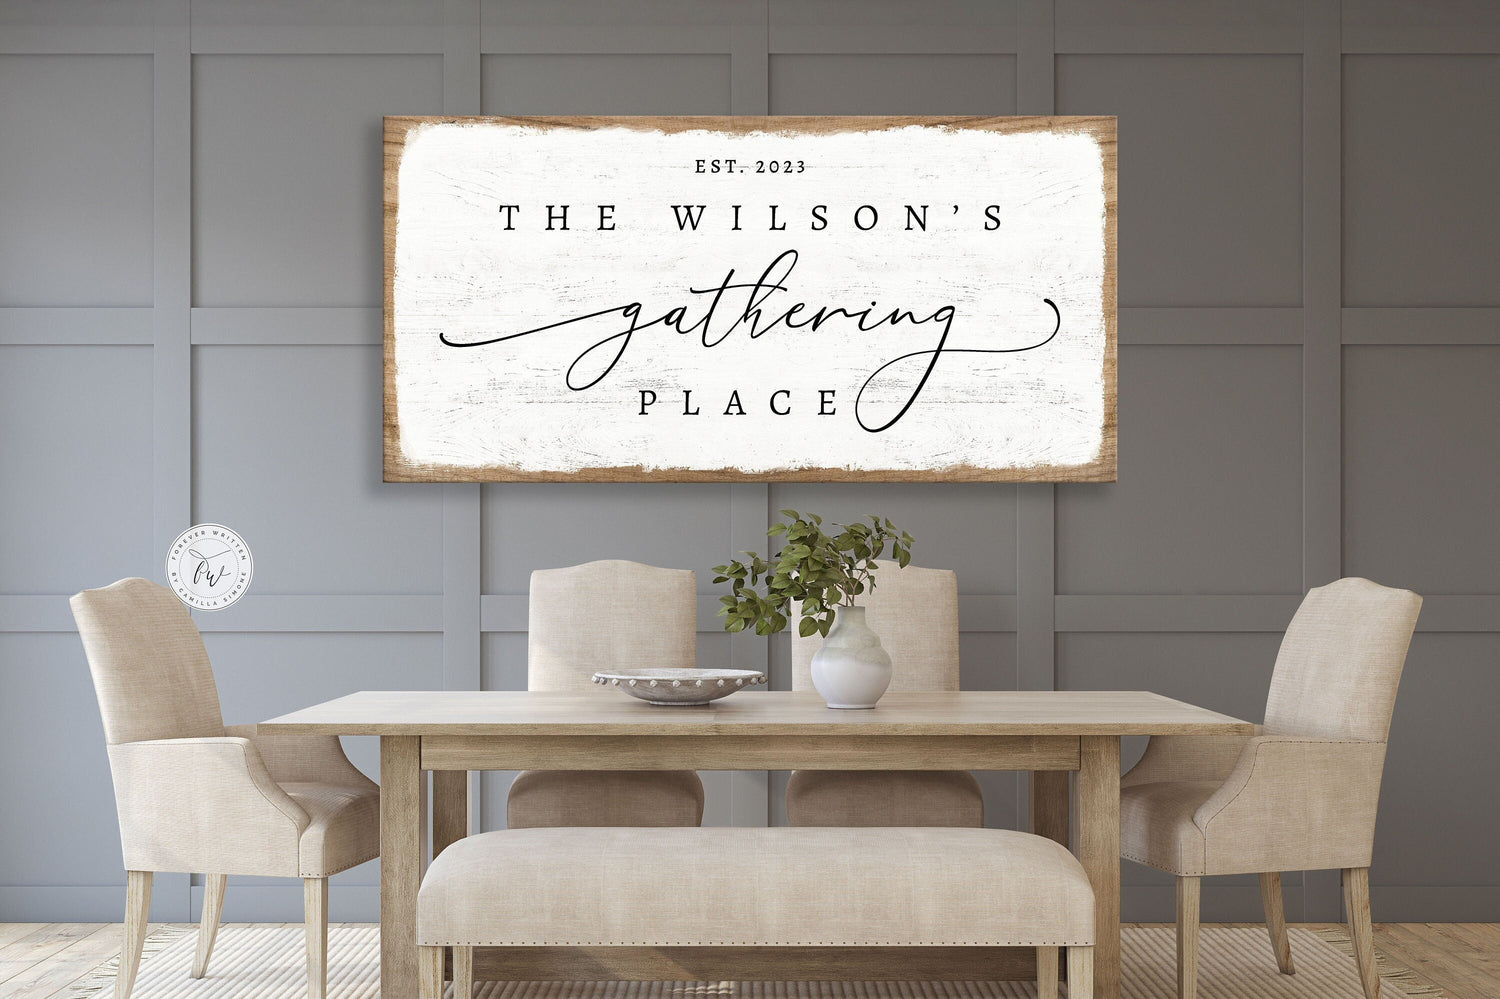 Gathering place custom family name sign